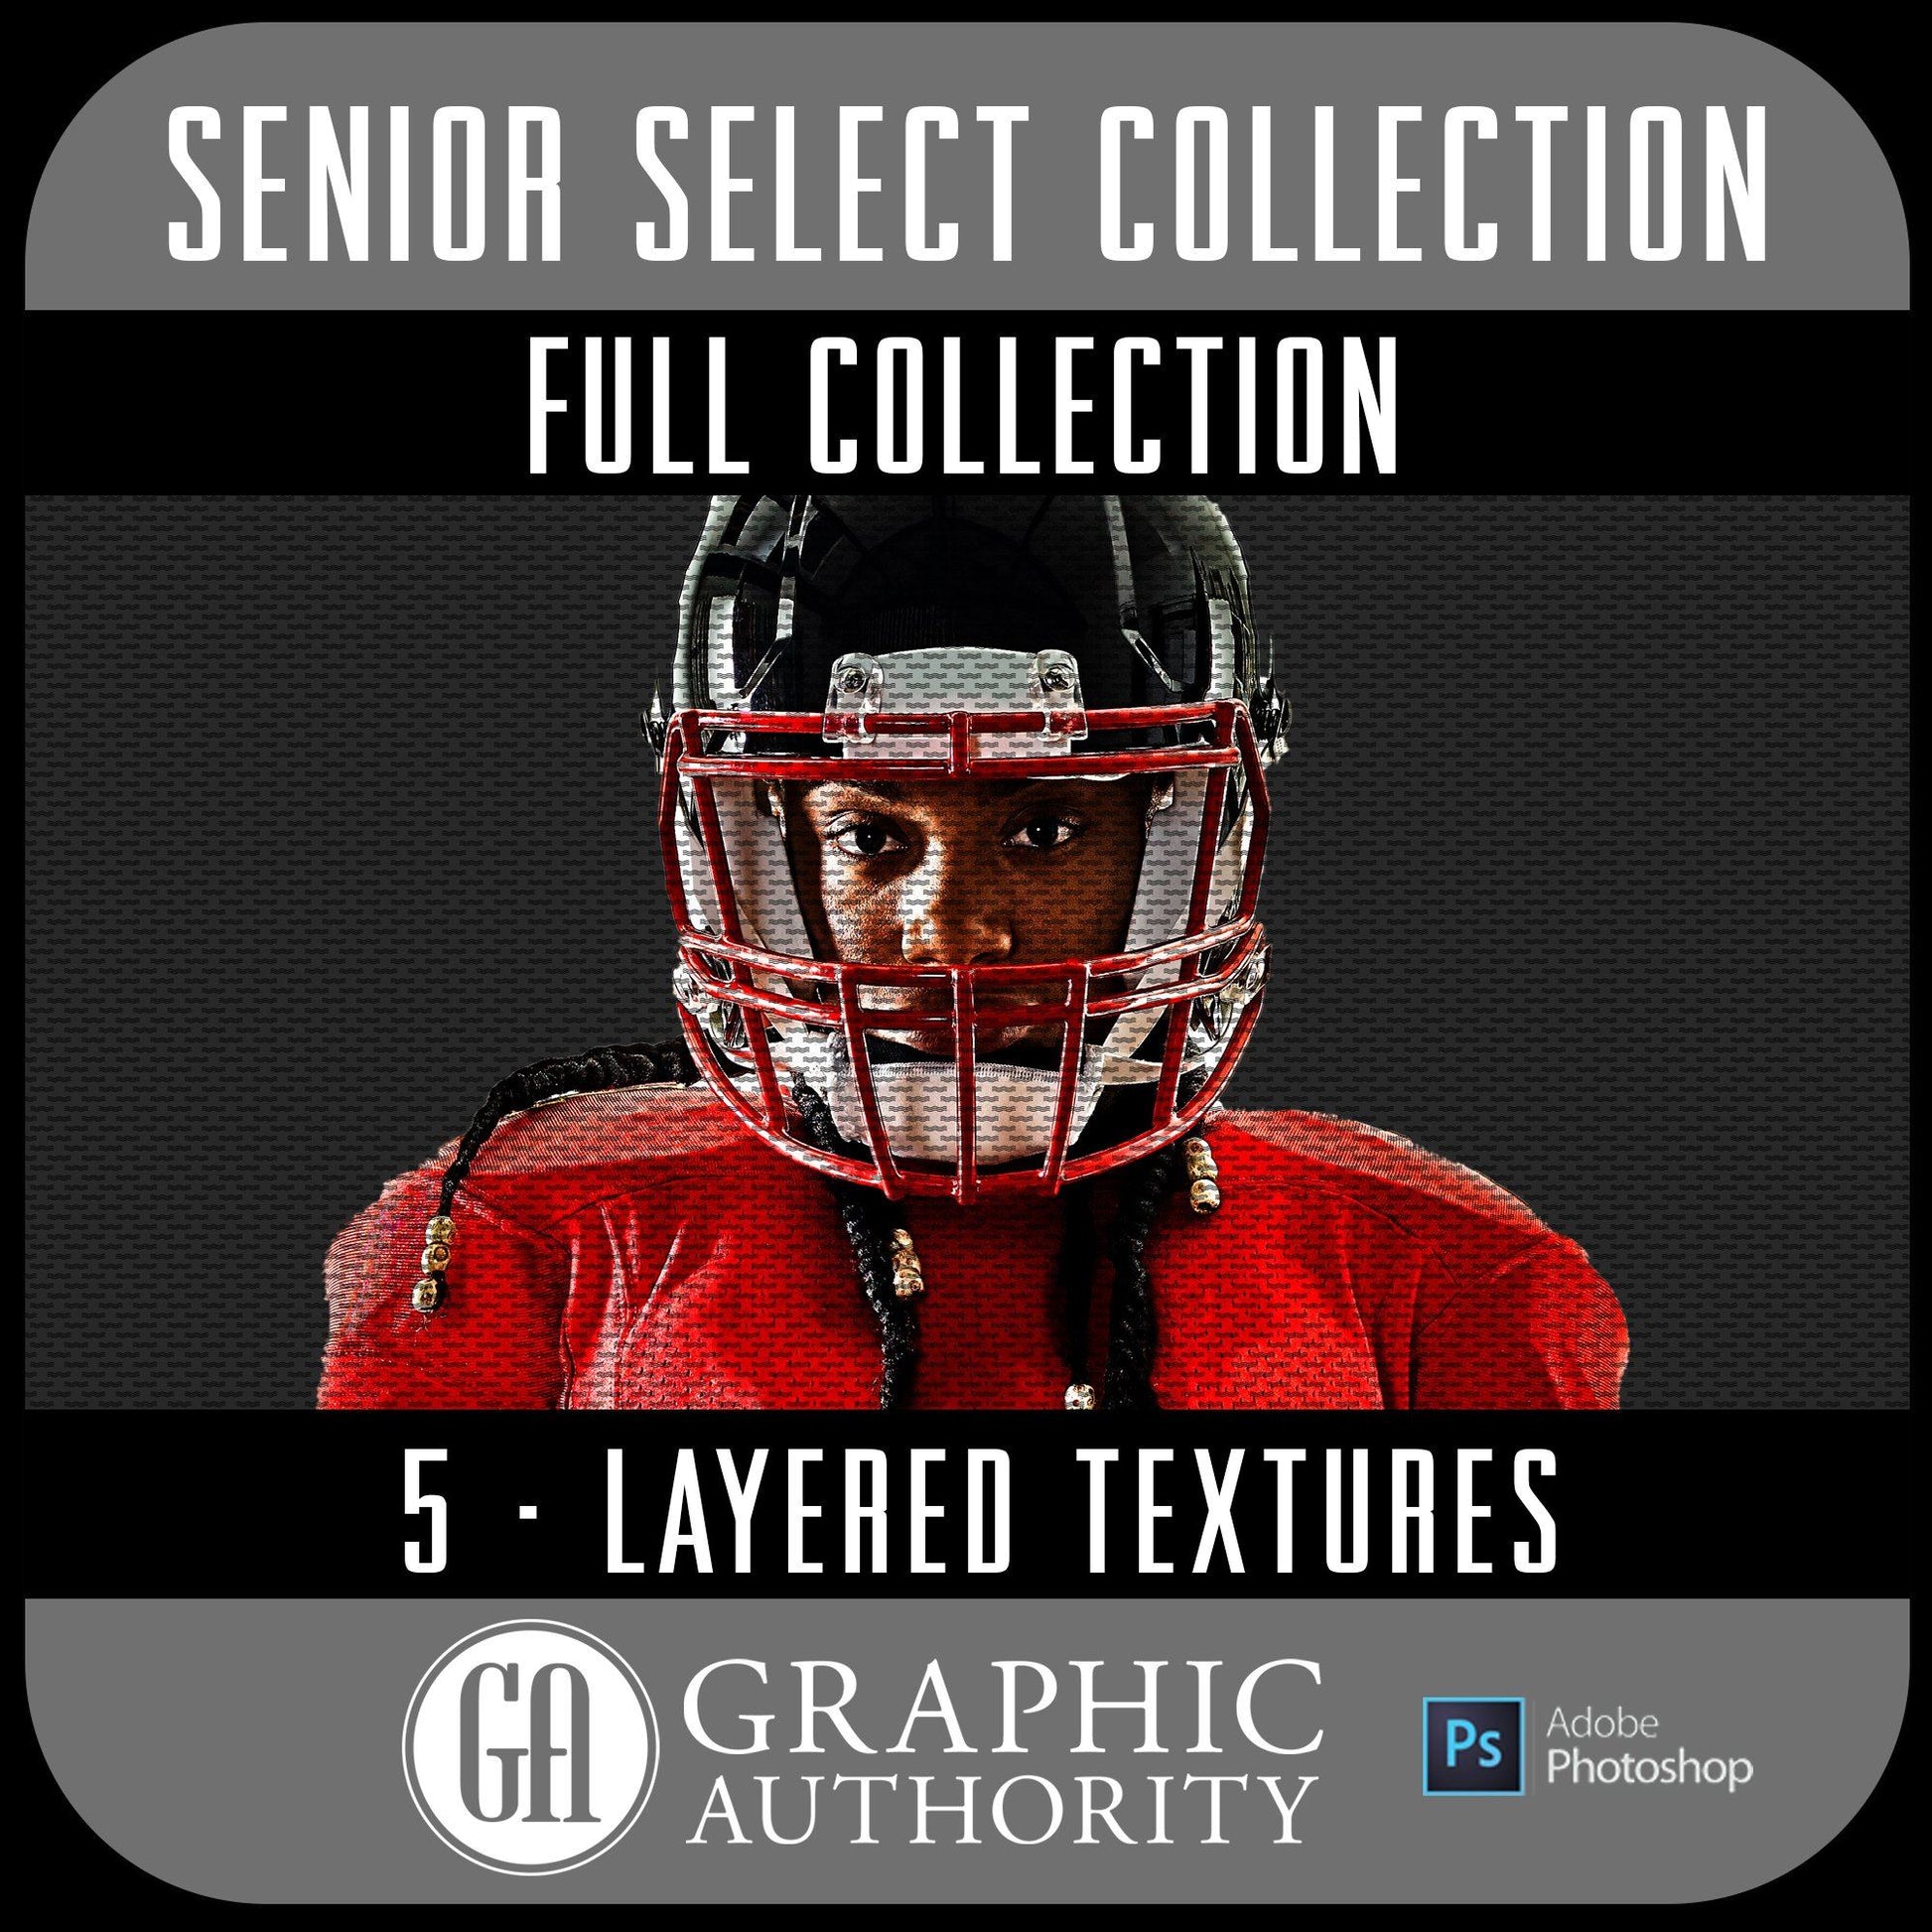 Senior Select - Layered Textures - Full Collection-Photoshop Template - Graphic Authority